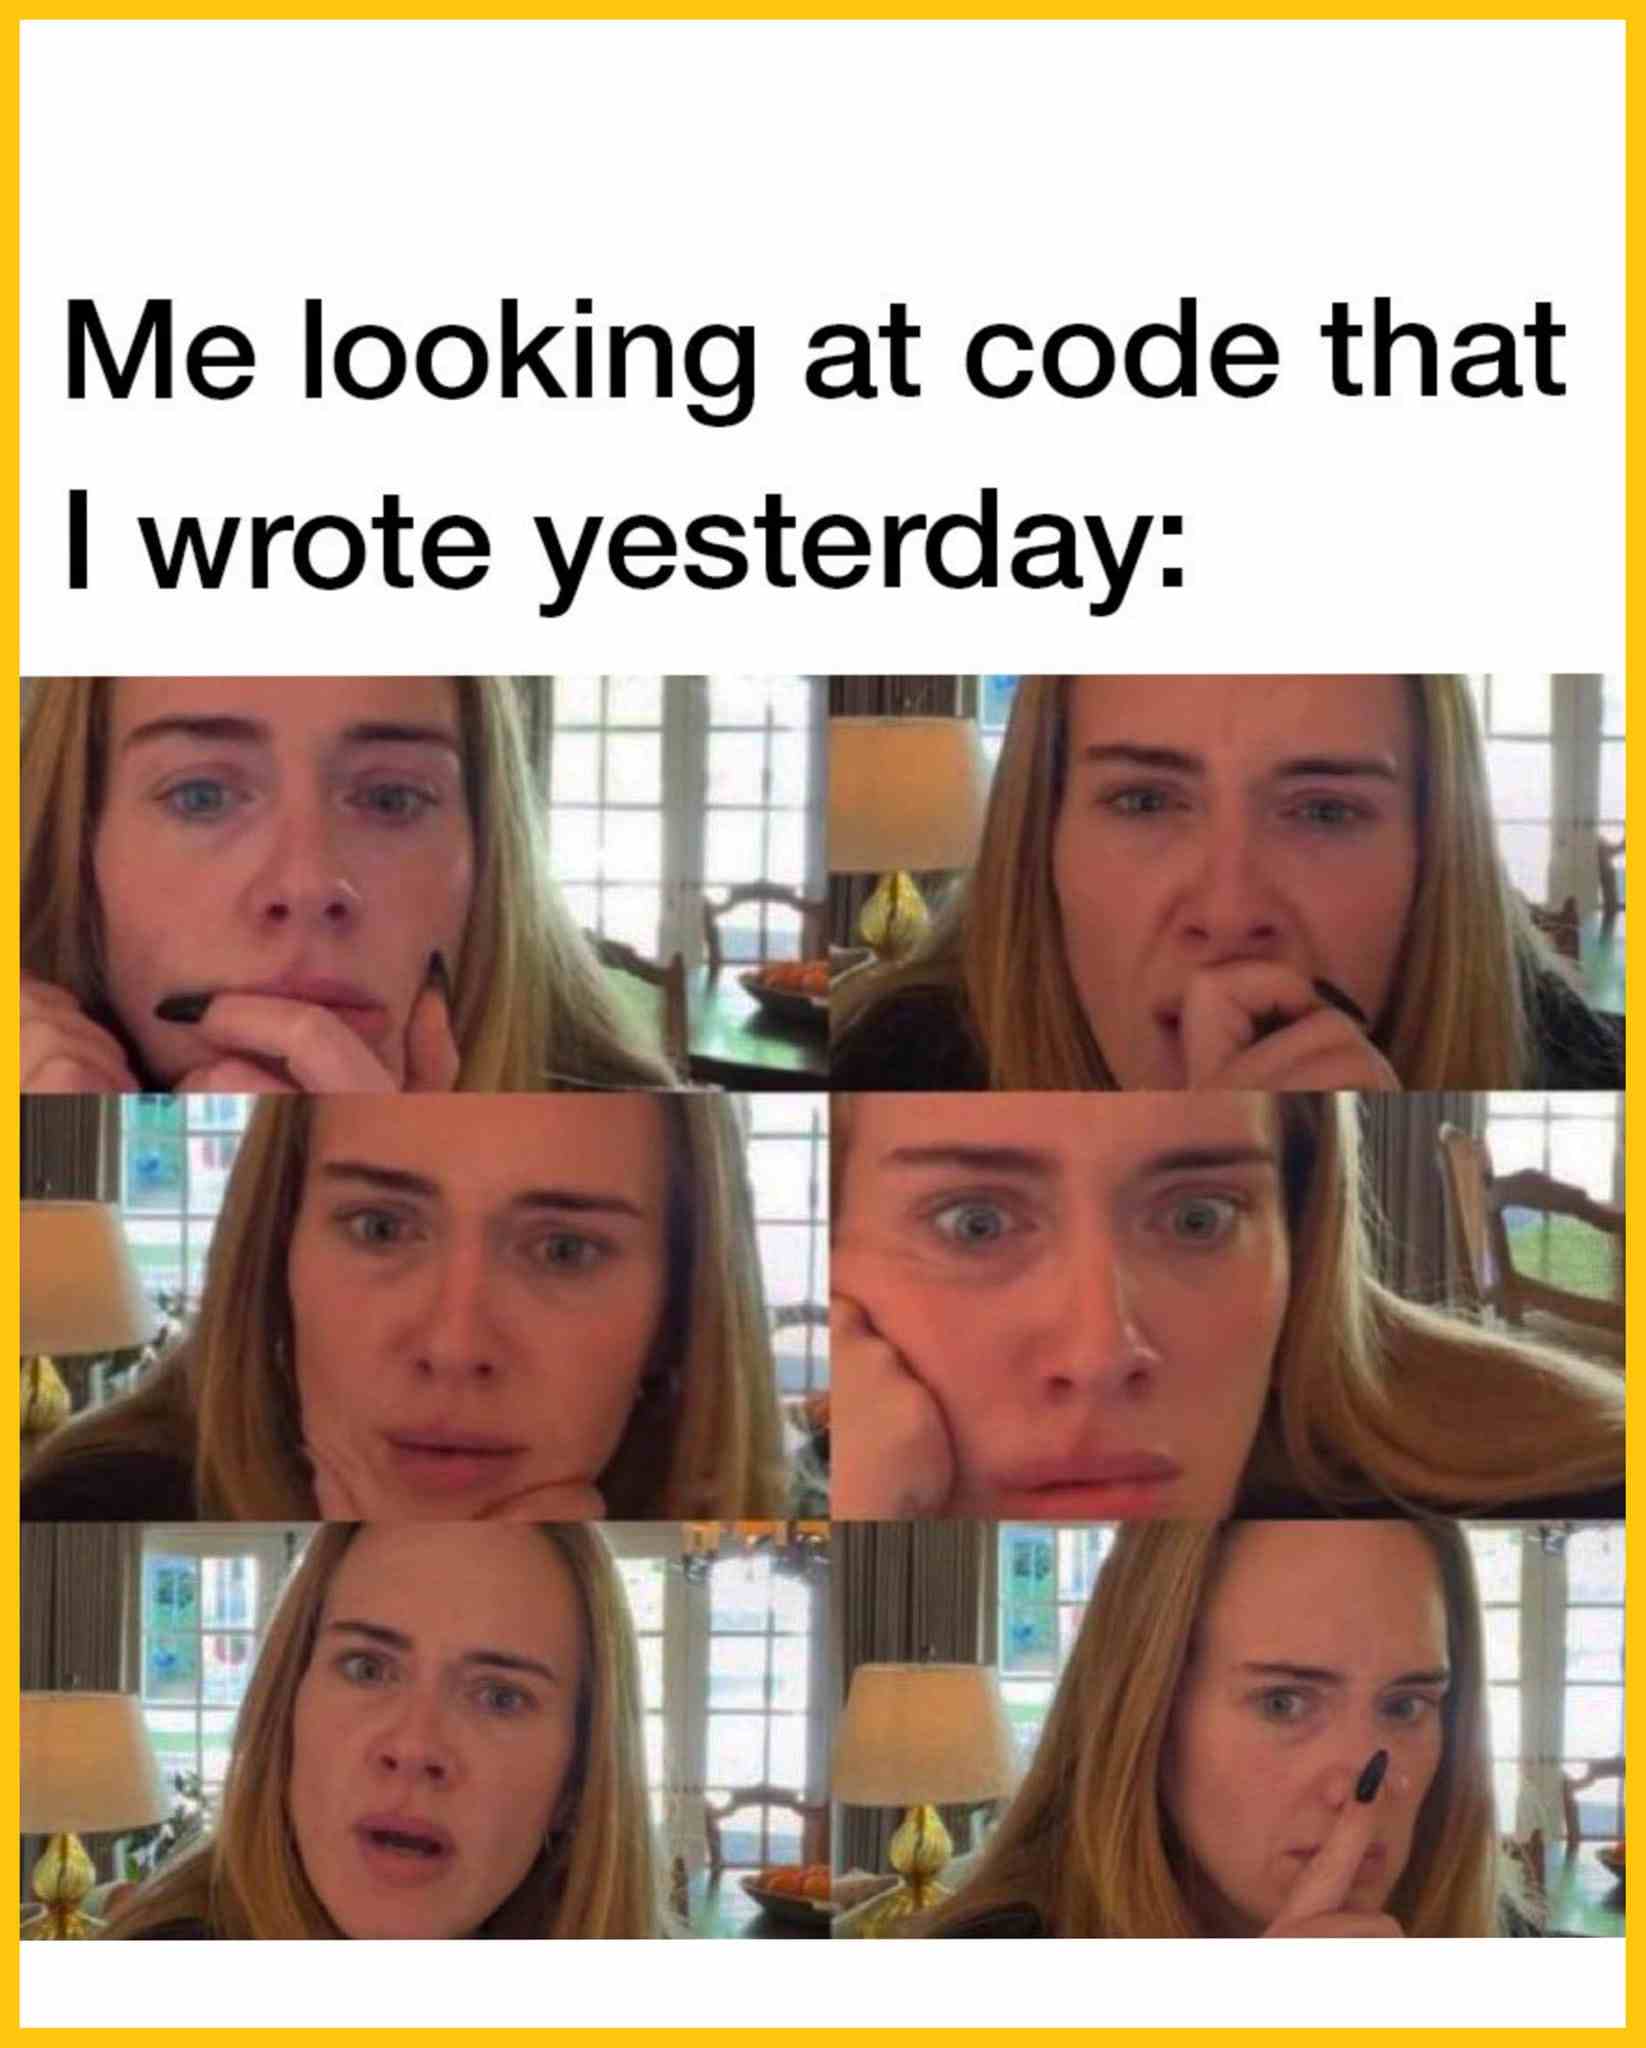 Me looking at code that i wrote yesterday